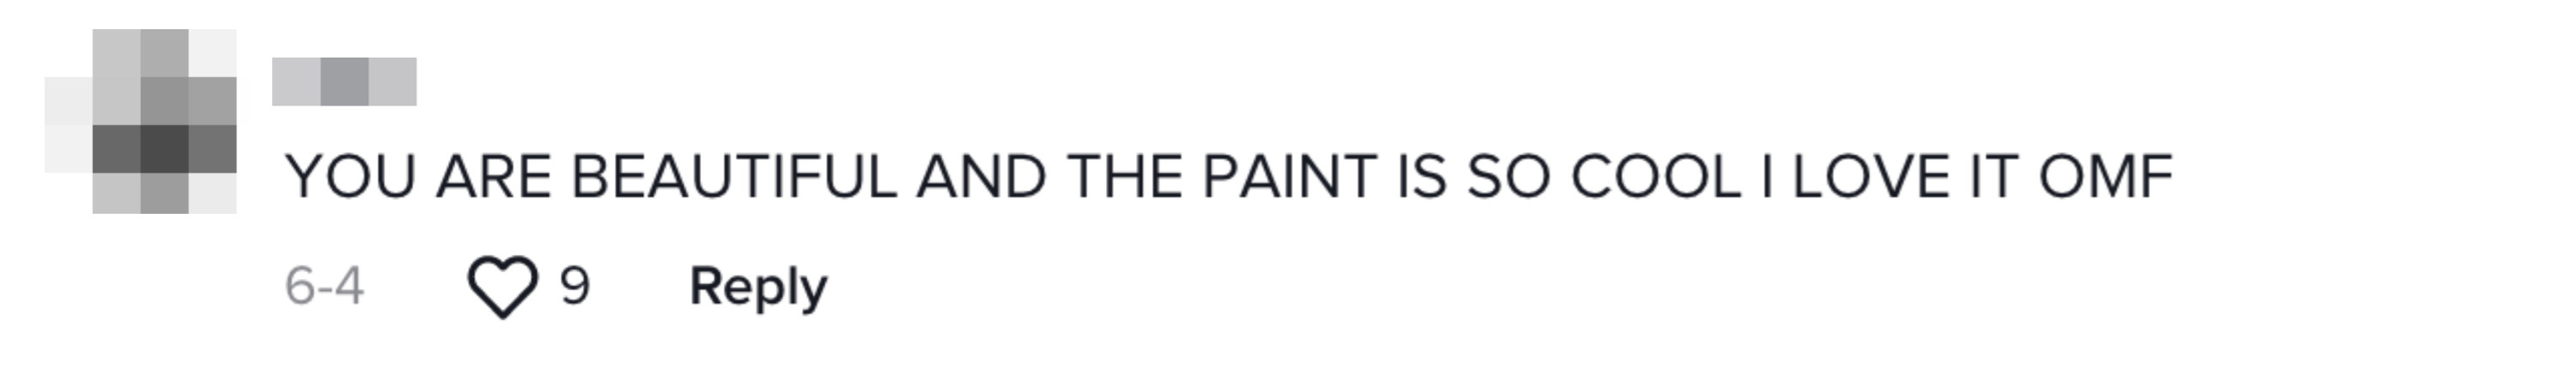 A comment saying Amara is beautiful and the paint looks really cool